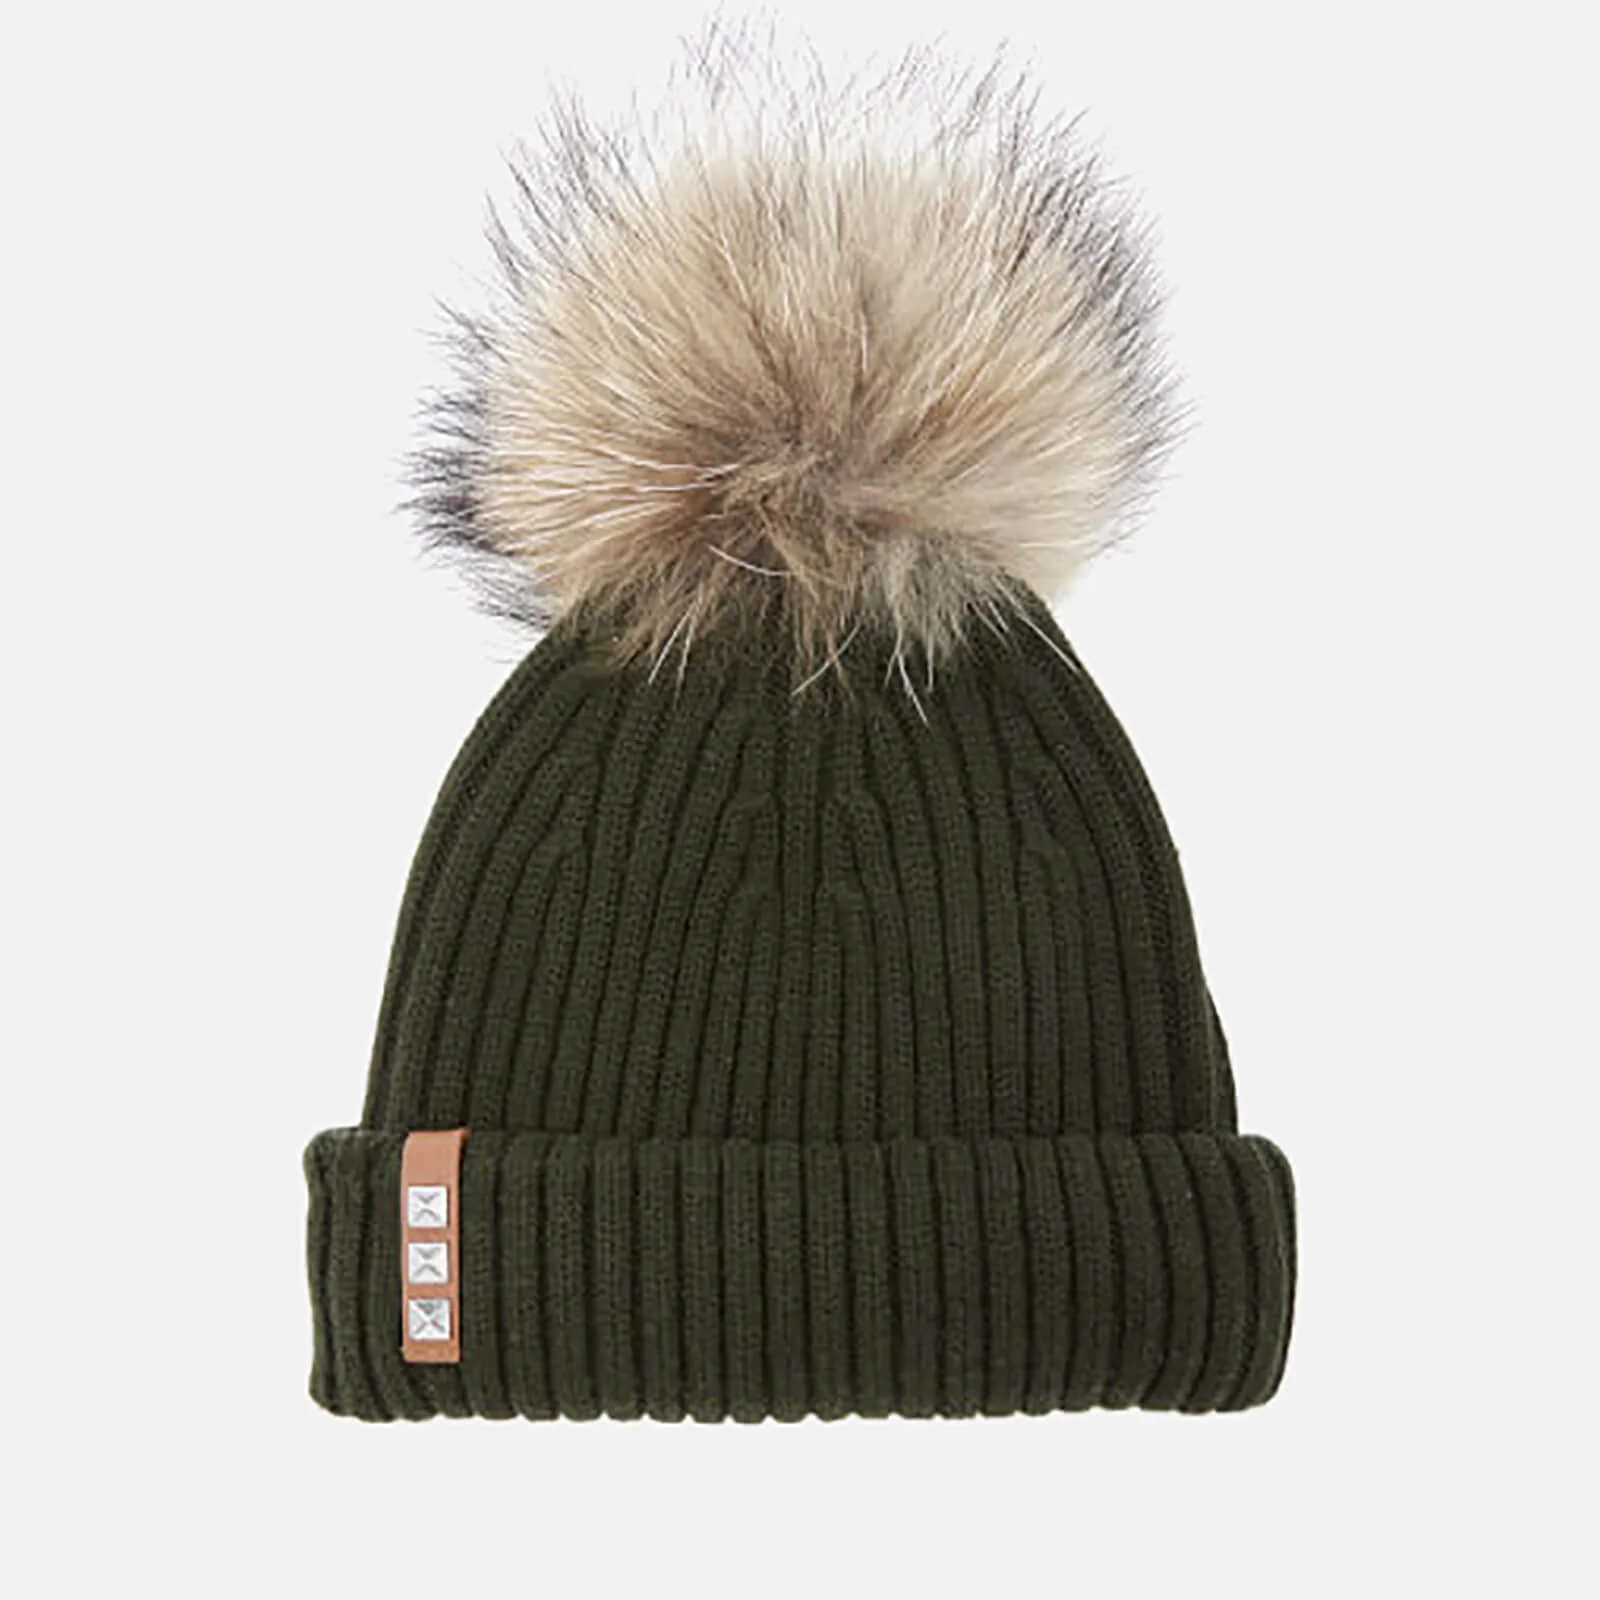 BKLYN Women's Merino Wool Hat with Natural Pom Pom - Army Green Image 1